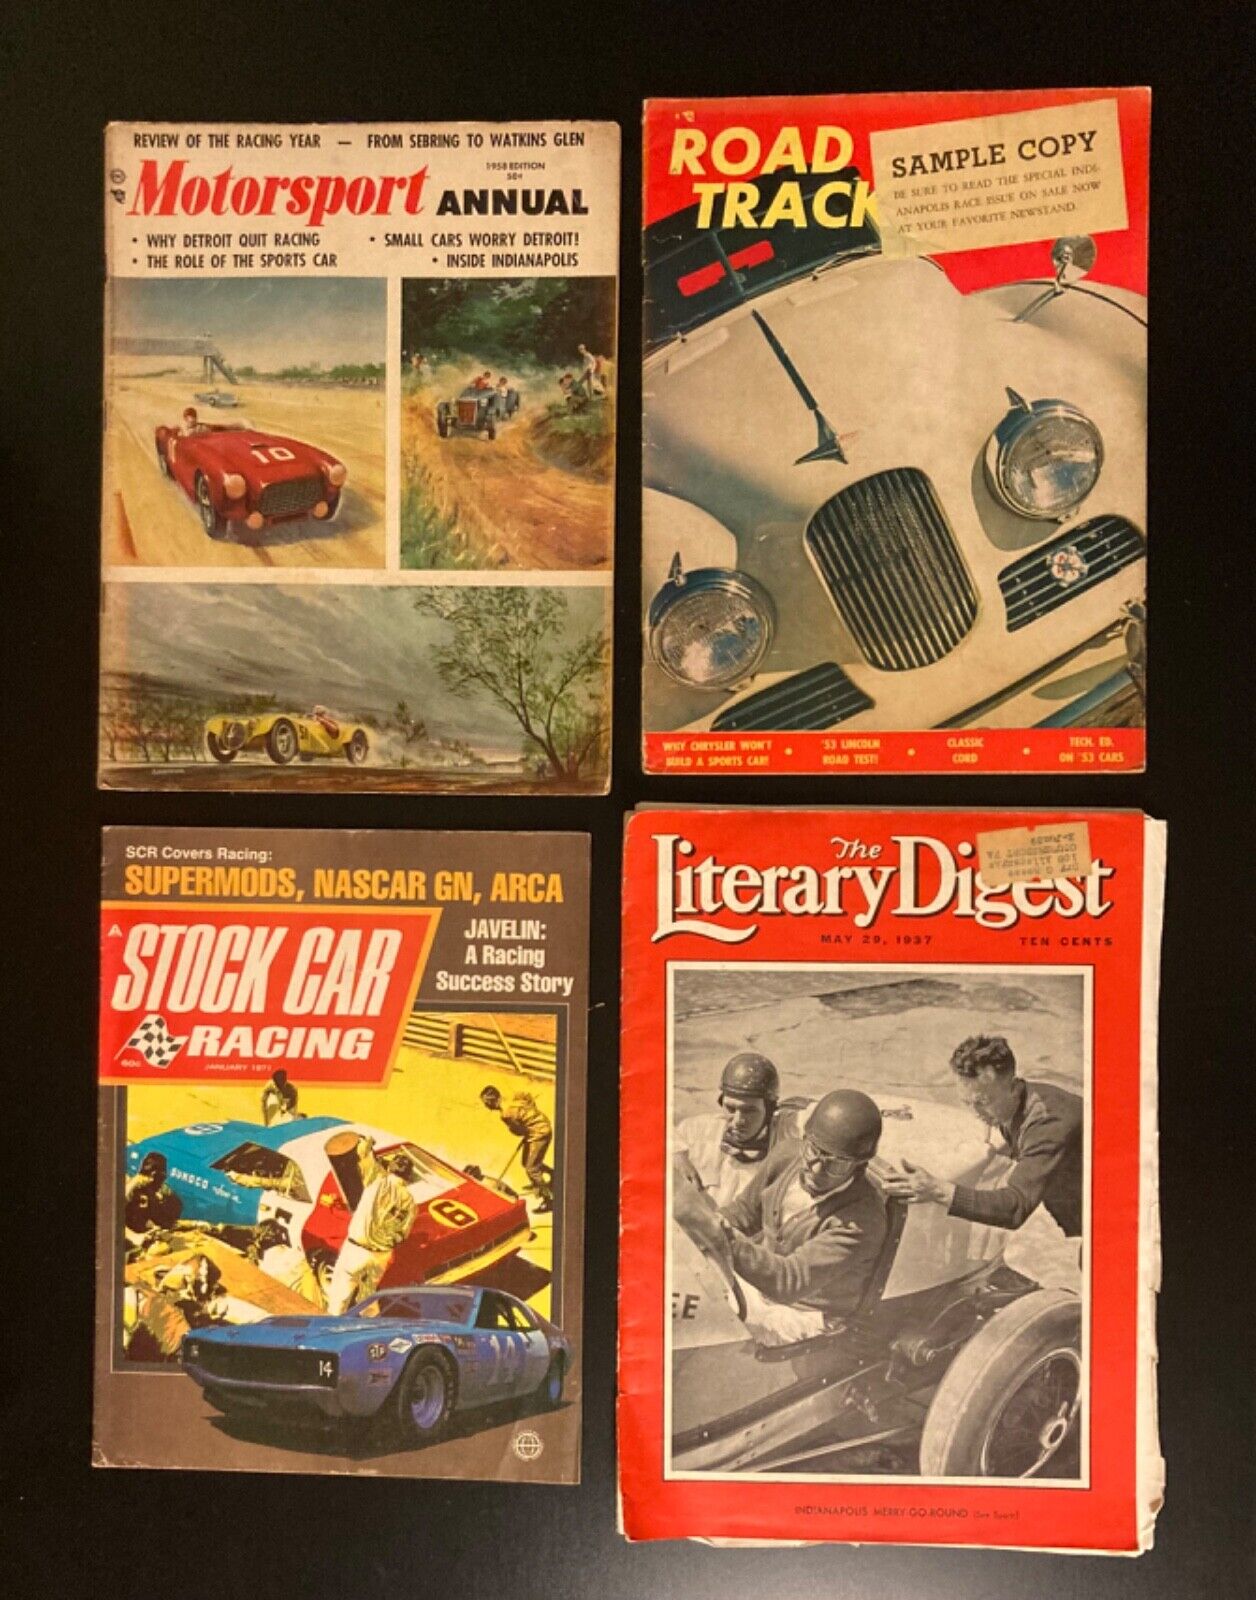 Vintage Auto Racing Motorsport Magazine Lot of 5 issues  Stock Car Racing & More